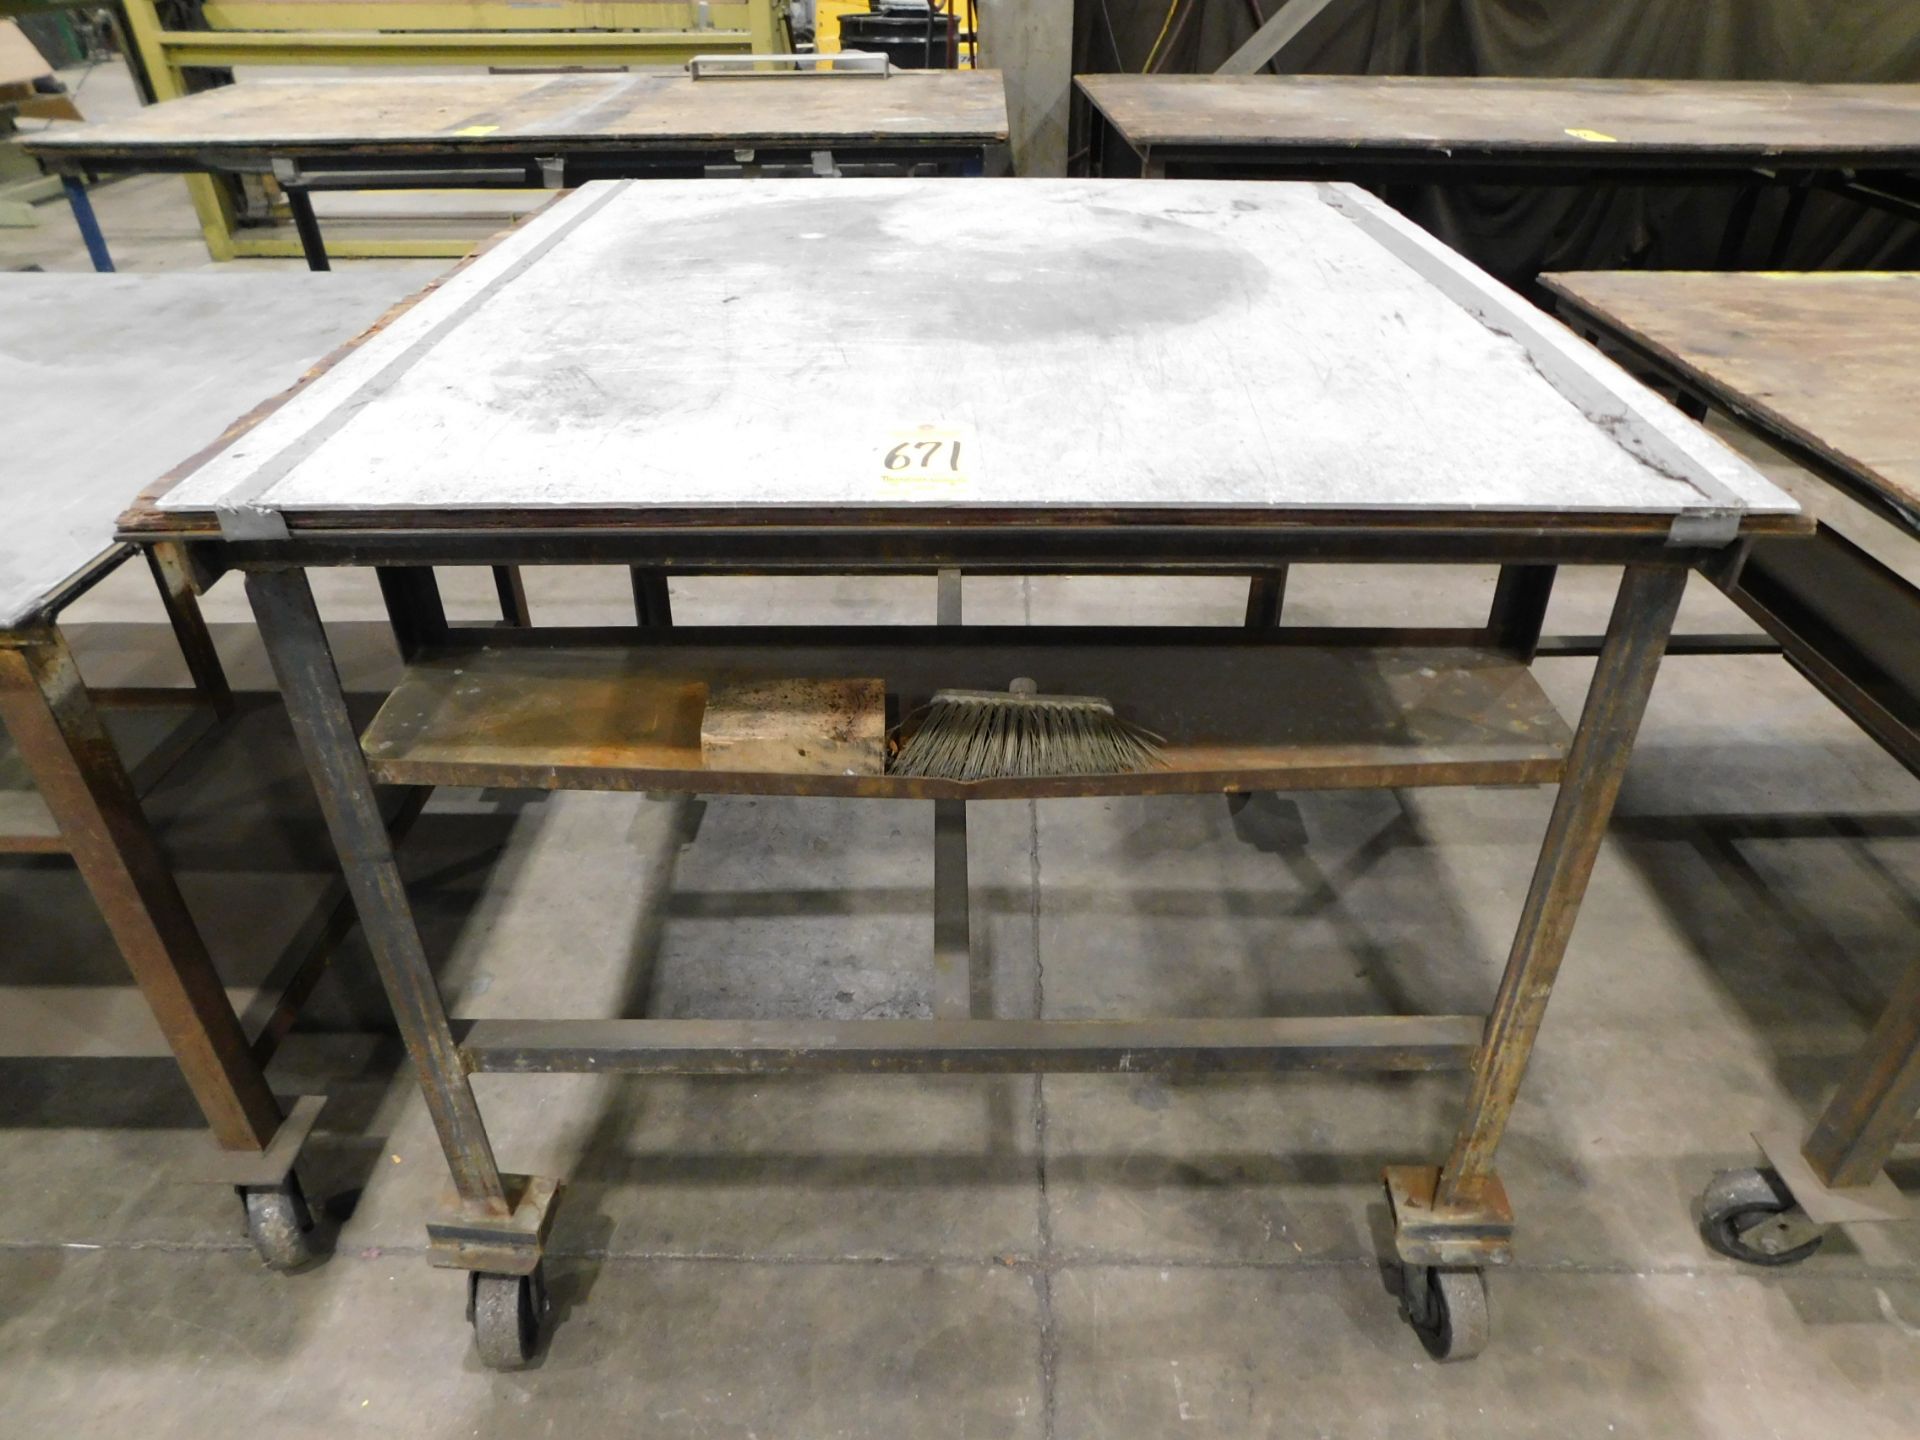 Shop Table on Casters, 48" X 48" X 42" High